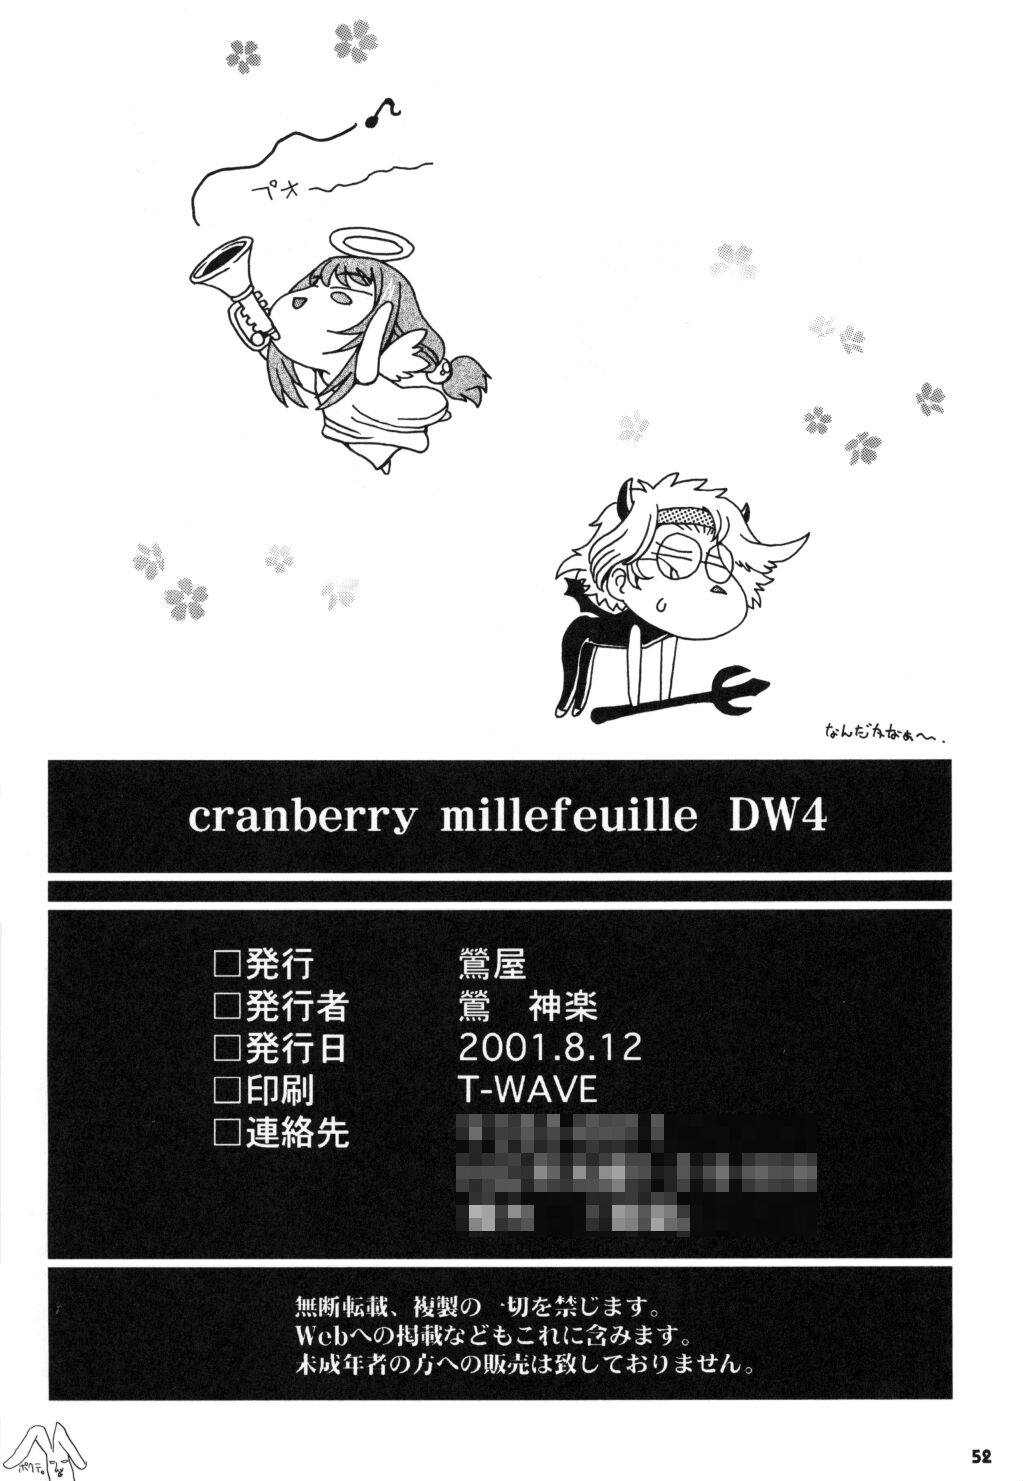 (C60) [鶯屋 (鶯神楽)] Cranberry Millefeuille DW4 (サクラ大戦3 ～巴里は燃えているか～)